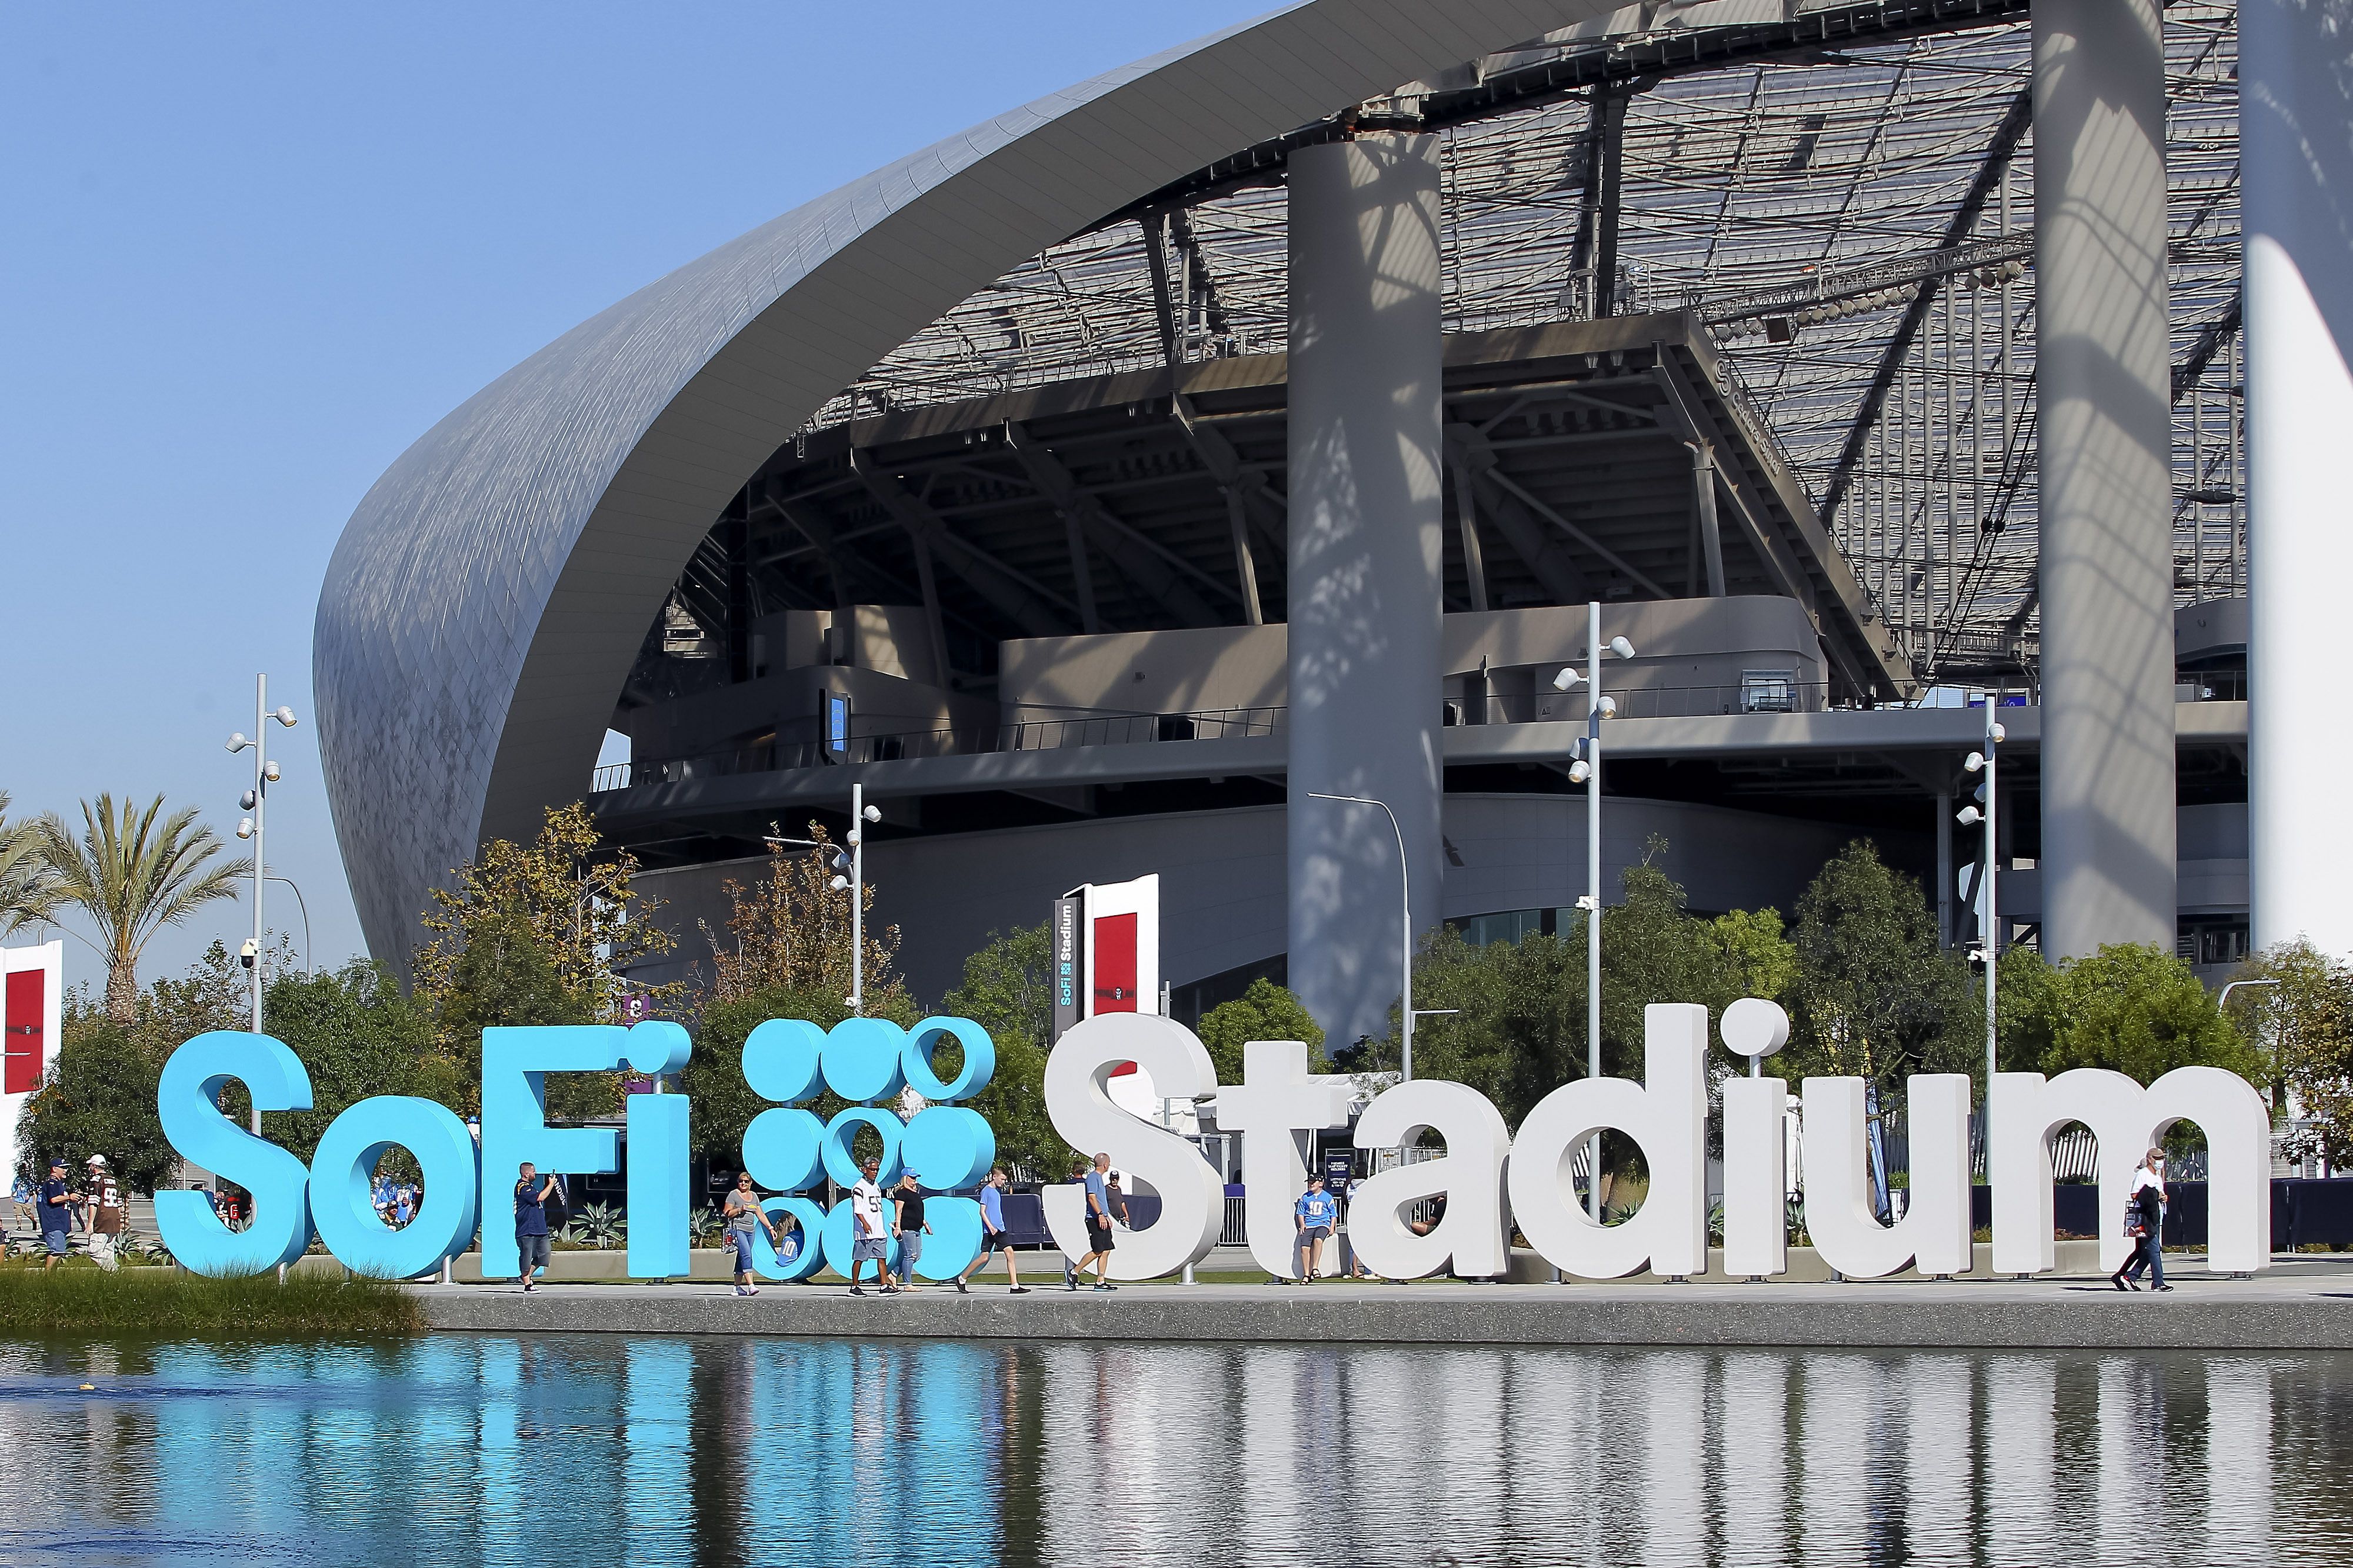 SoFi Stadium Know Before You Go  Los Angeles Chargers 